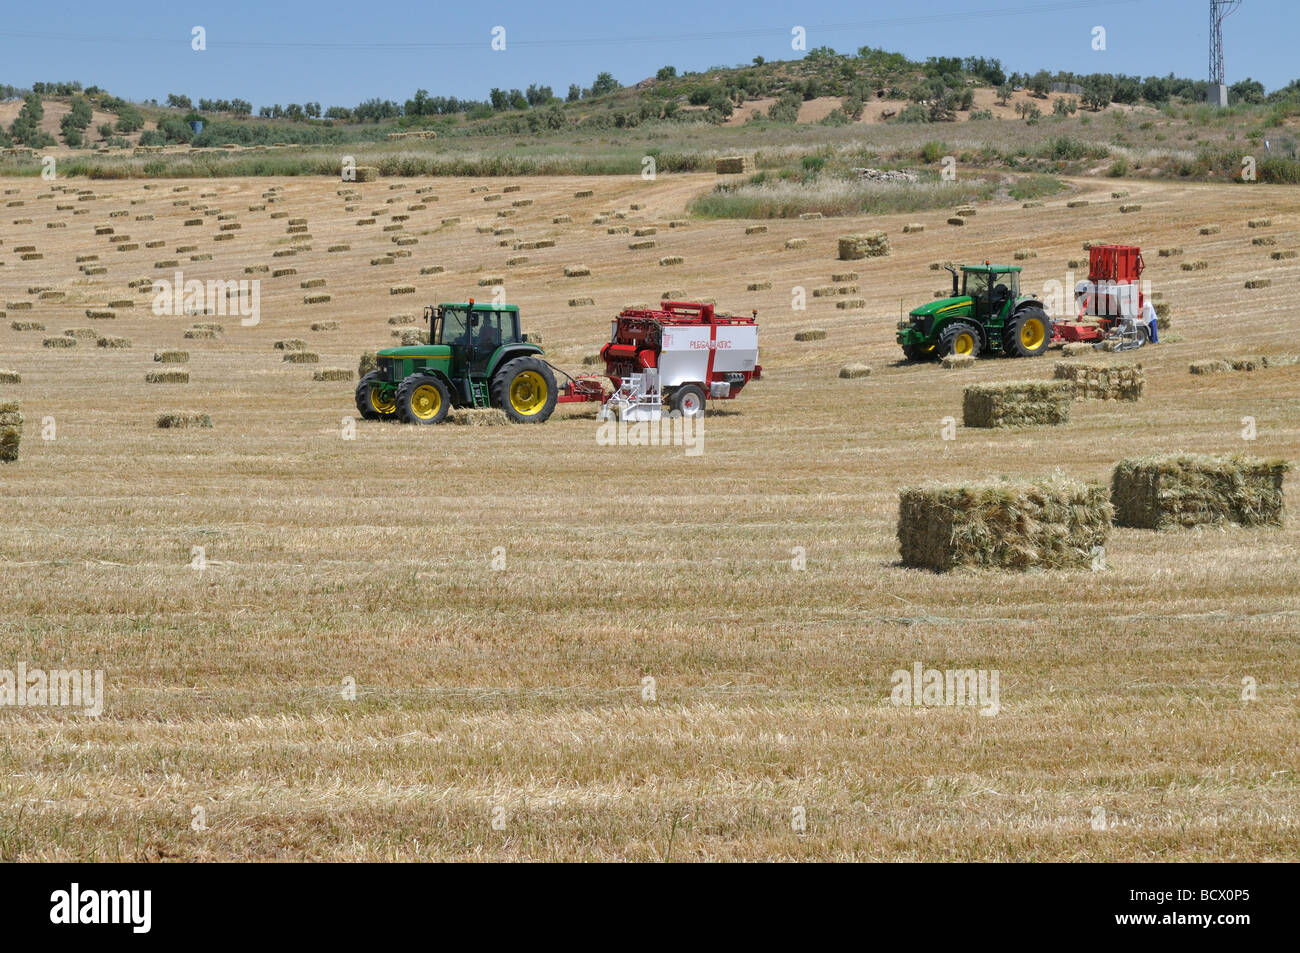 Tractors in field of straw baling small straw bales into larger ones at harvest time Stock Photo